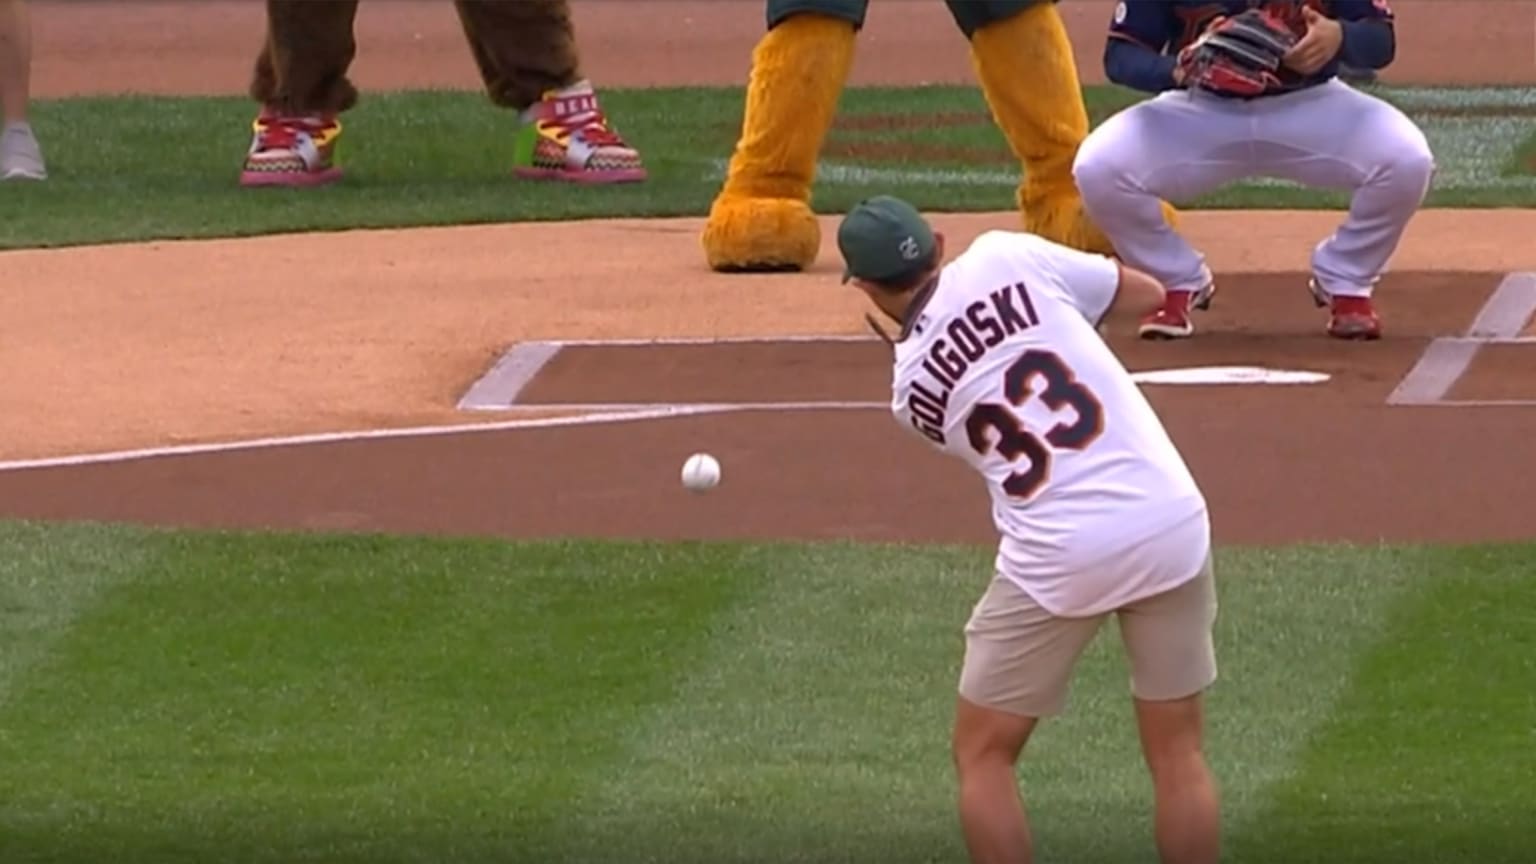 A man in a Twins jersey reading Goligoski above the number 33 sends a ceremonial first pitch toward the catcher with a hockey stick